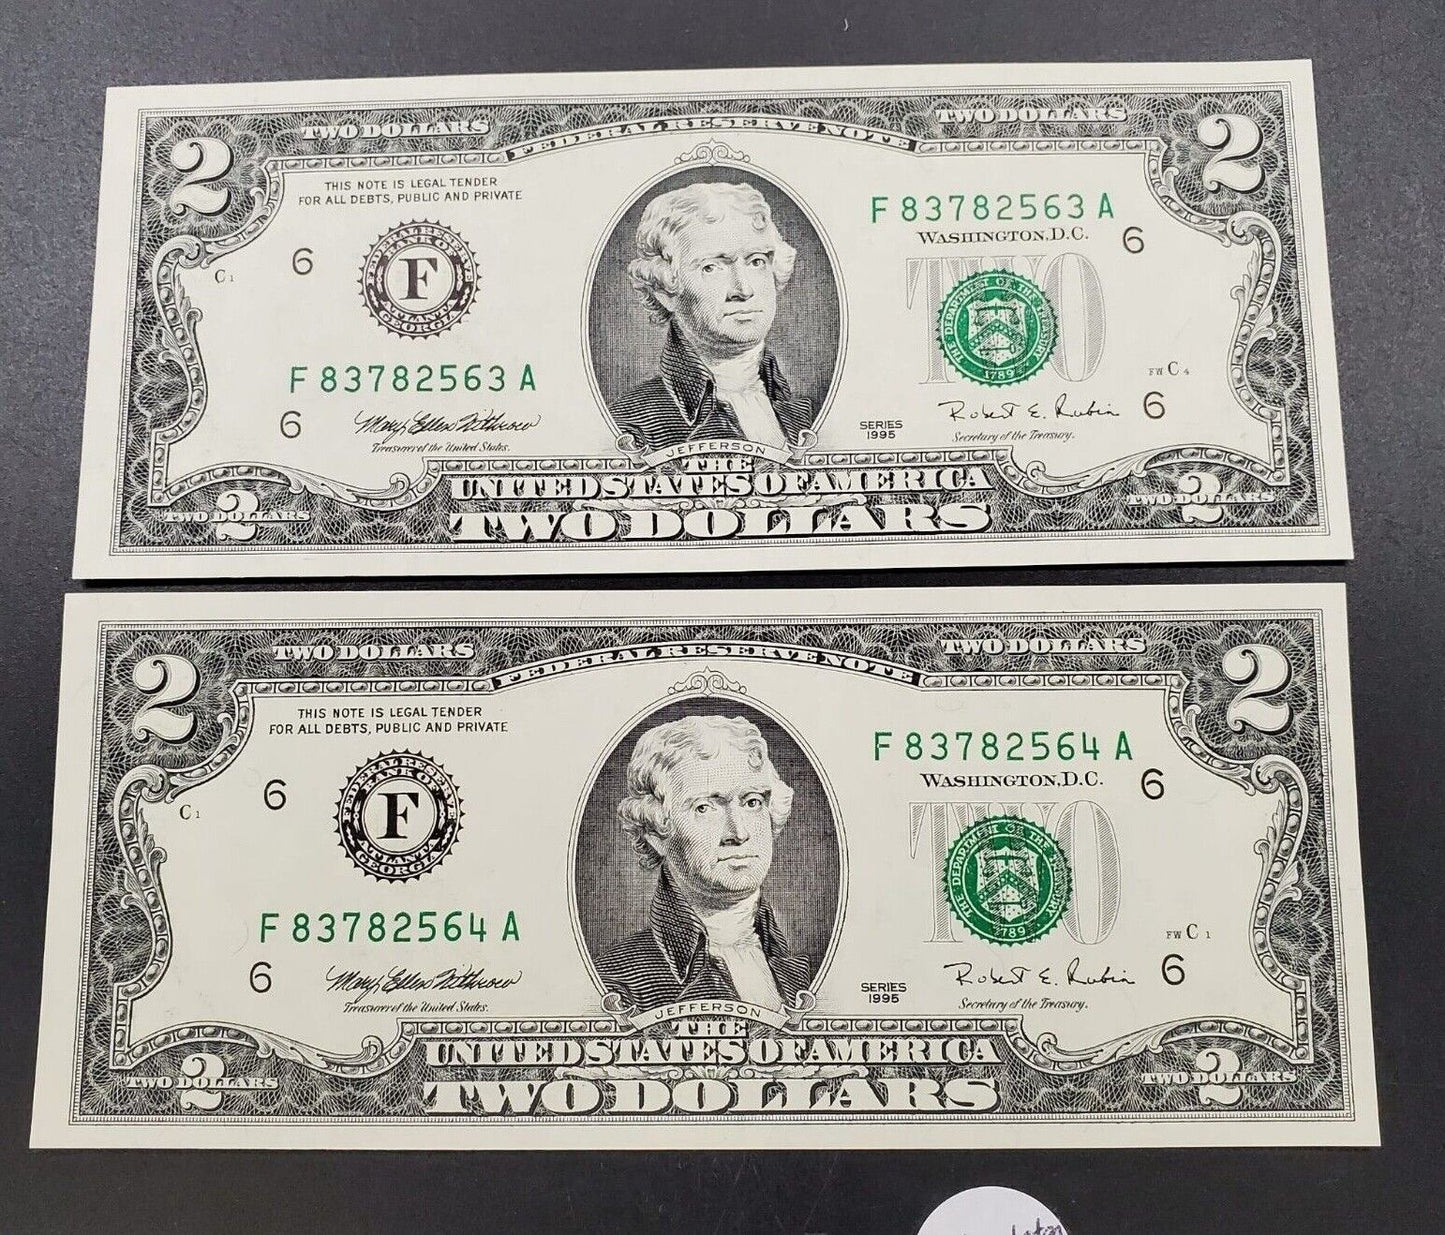 2 CONSECUTIVE 1995 $2 FRN FEDERAL RESERVE NOTE CH UNC #1